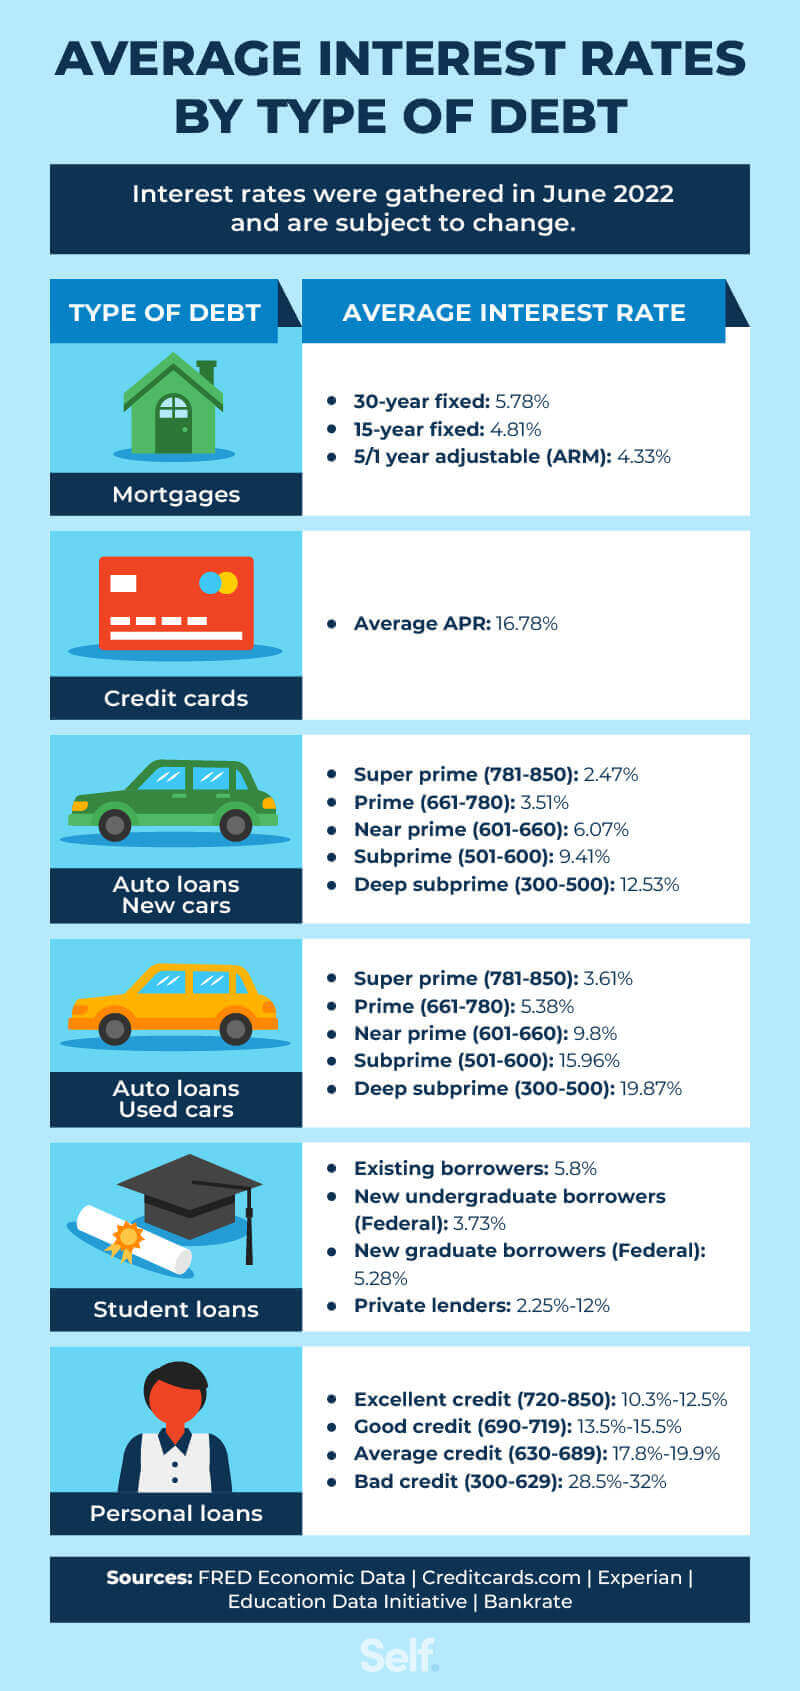 Average interest rates by type of debt